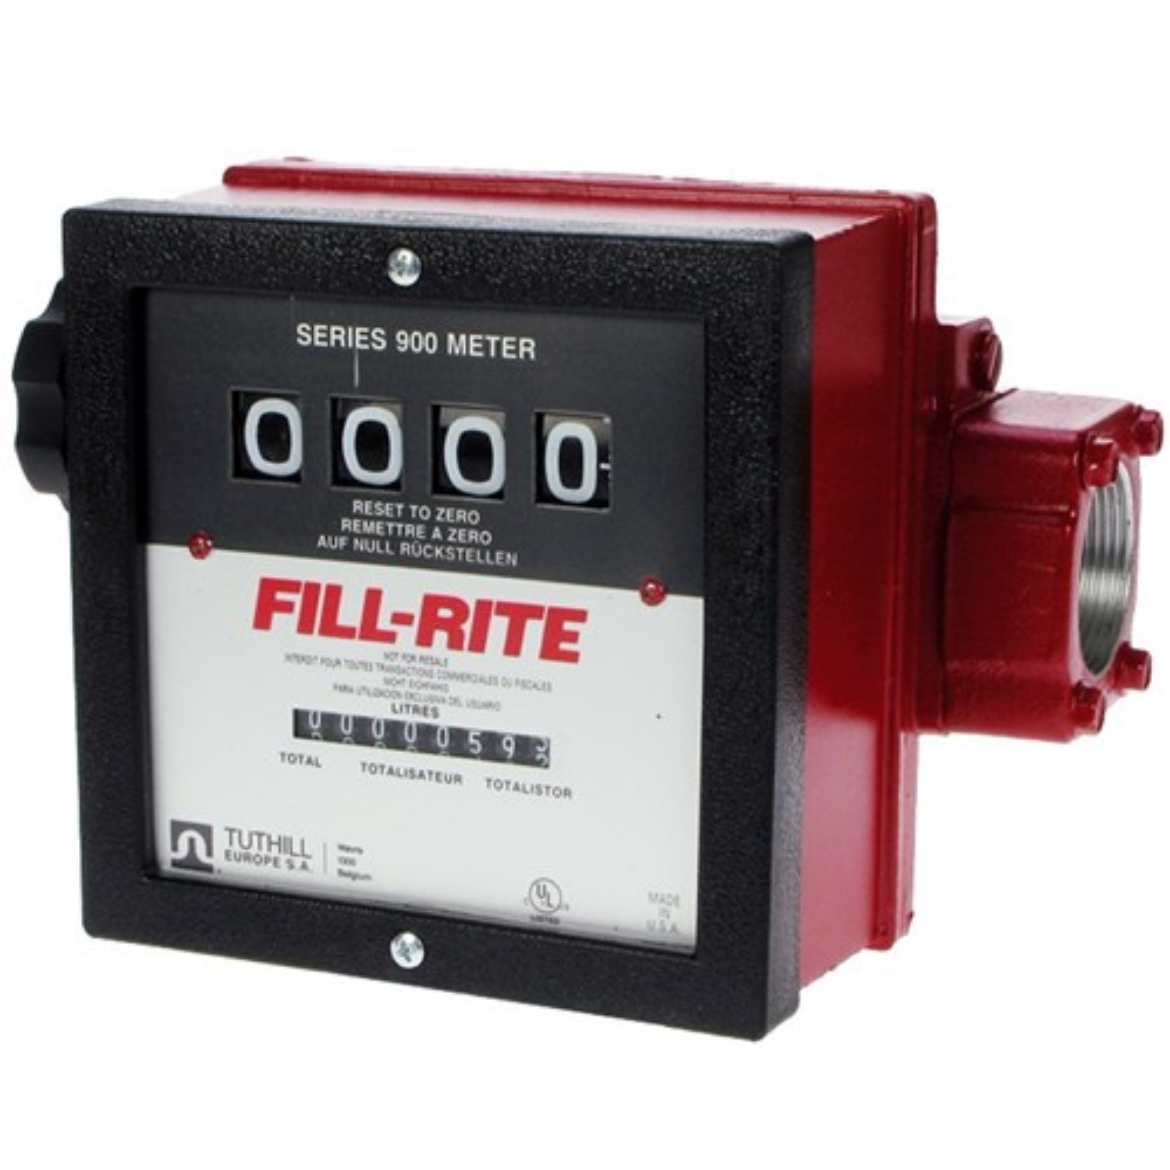 Picture of FILL-RITE 1-1/2 BSP quality FILL-RITE mechanical meter. 150 LPM max.